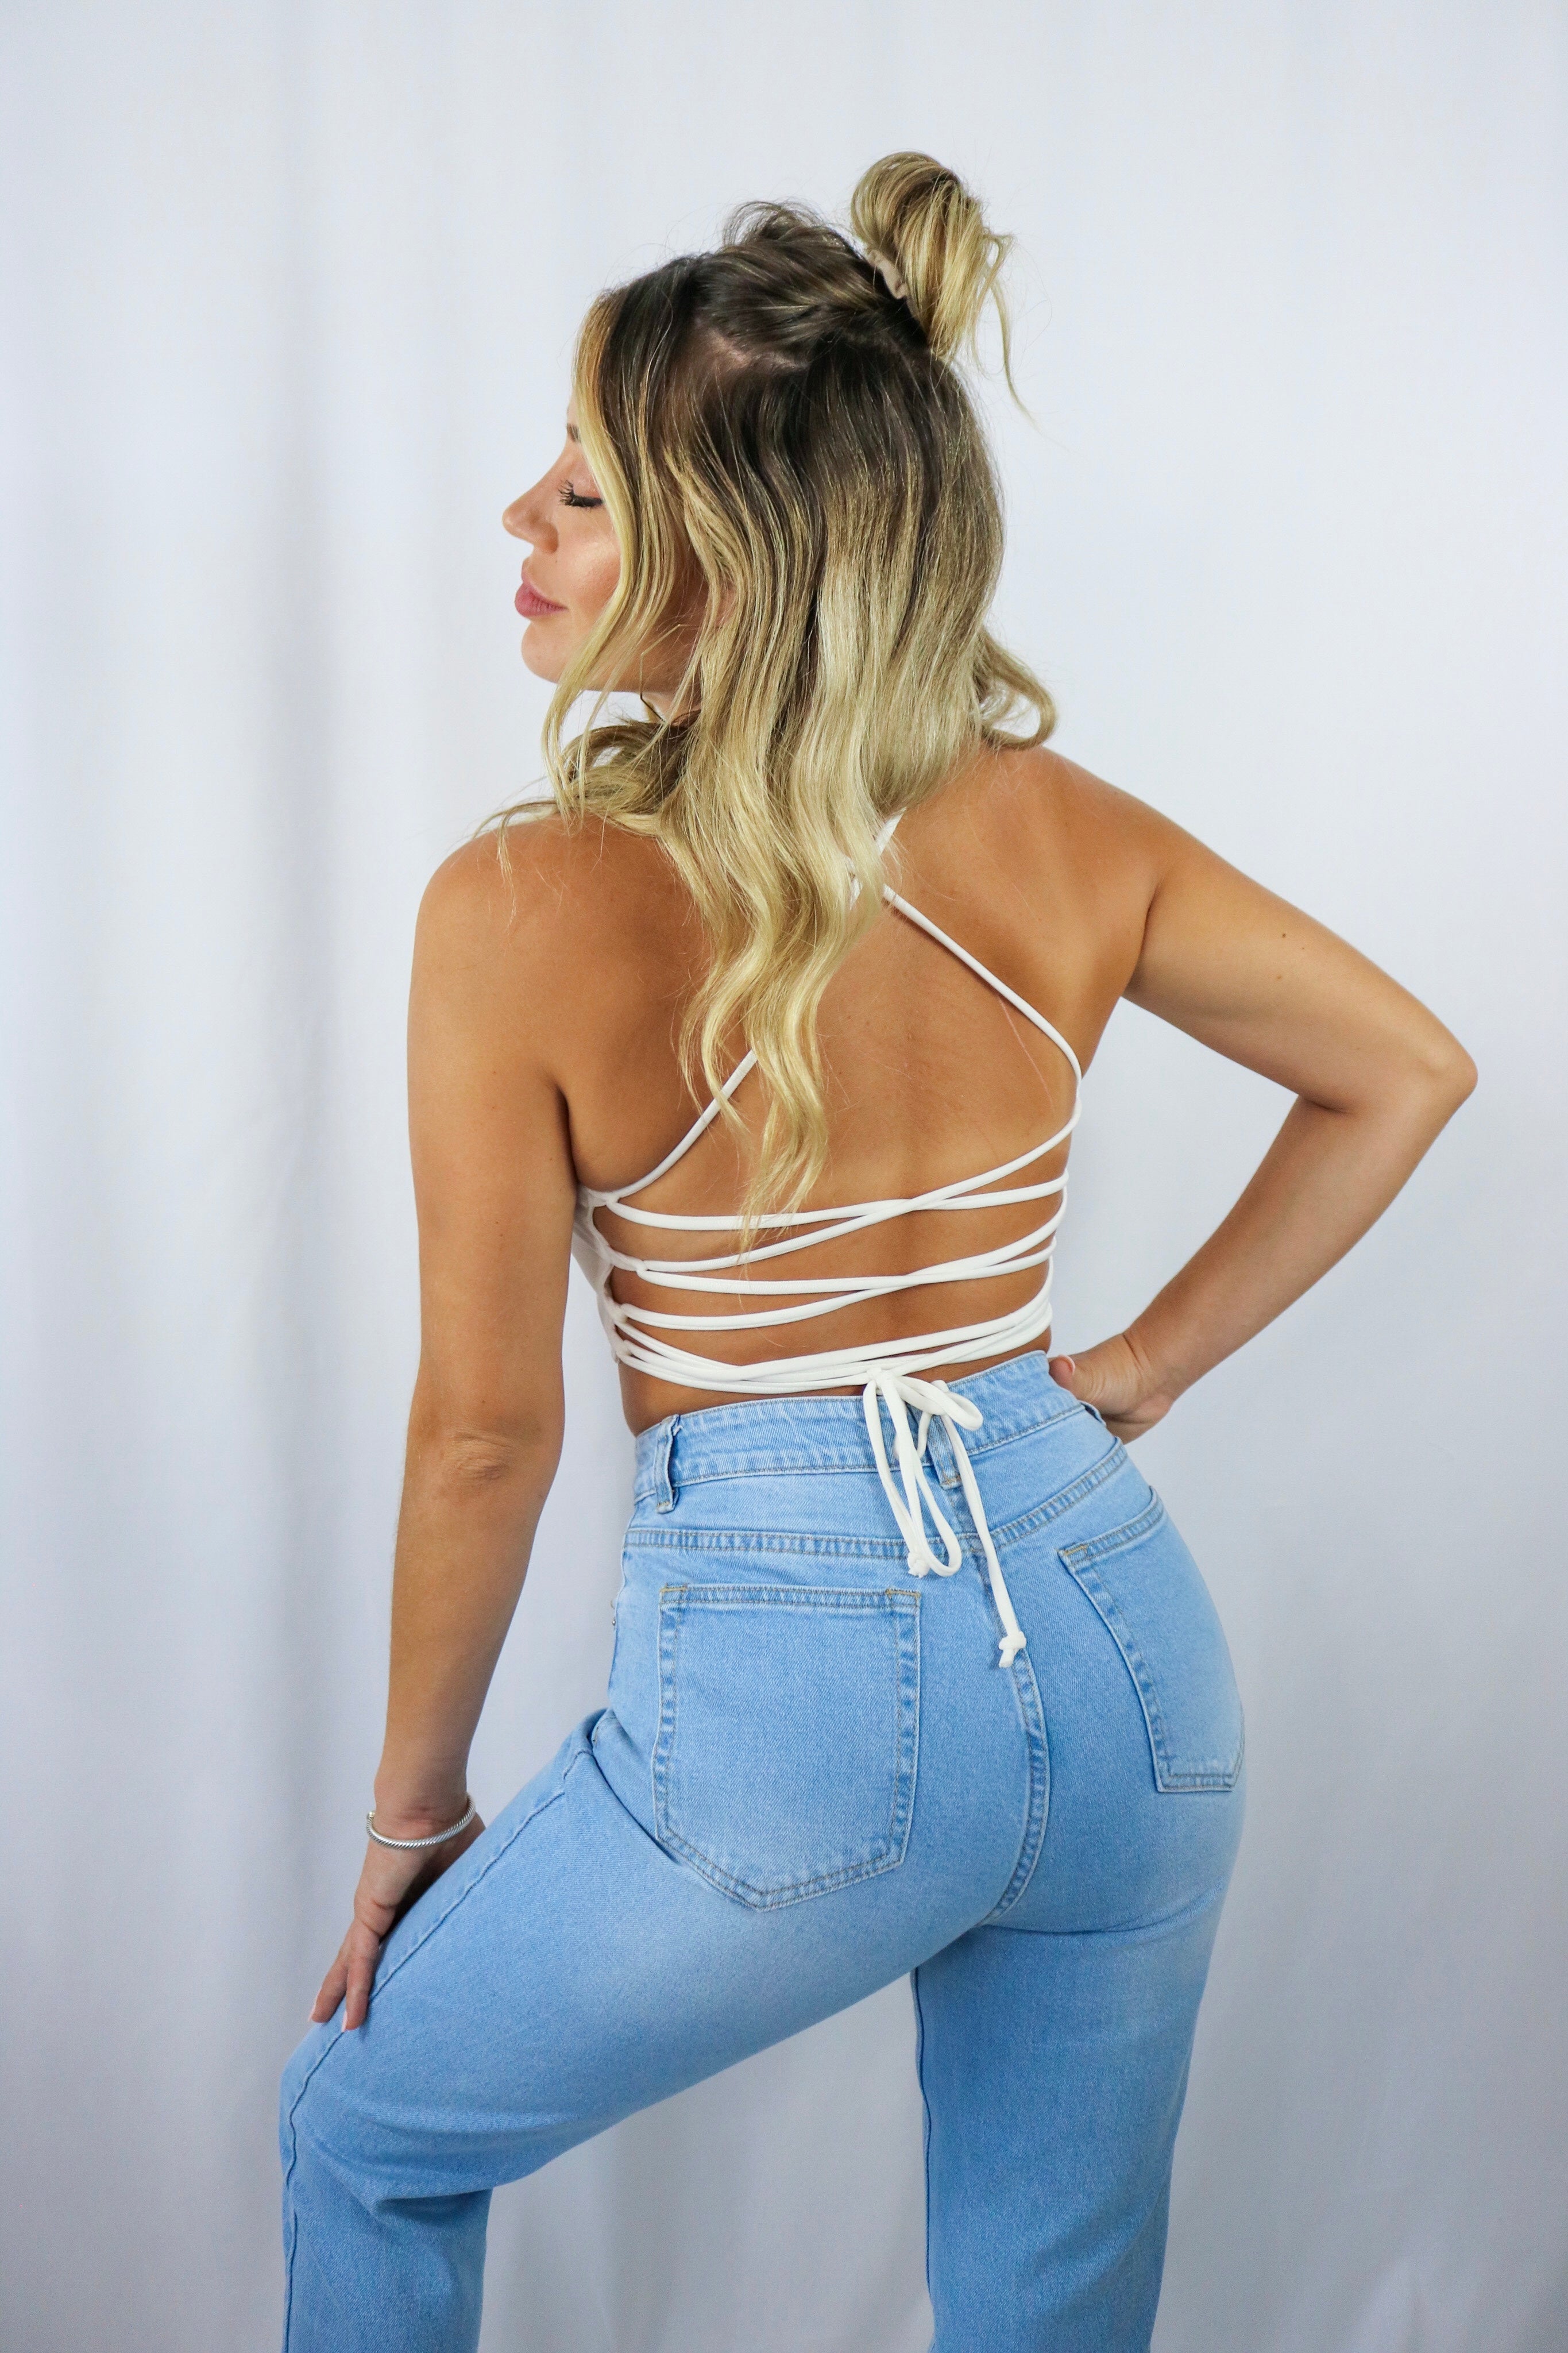 Blonde girl models a white crop top for Scarlette The Label, an online fashion boutique for women. The white crop has criss cross (crossback) detail in the back and has adjustable strings to tighten and loosen the fit. Paired with light wash denim boyfriend jeans. 